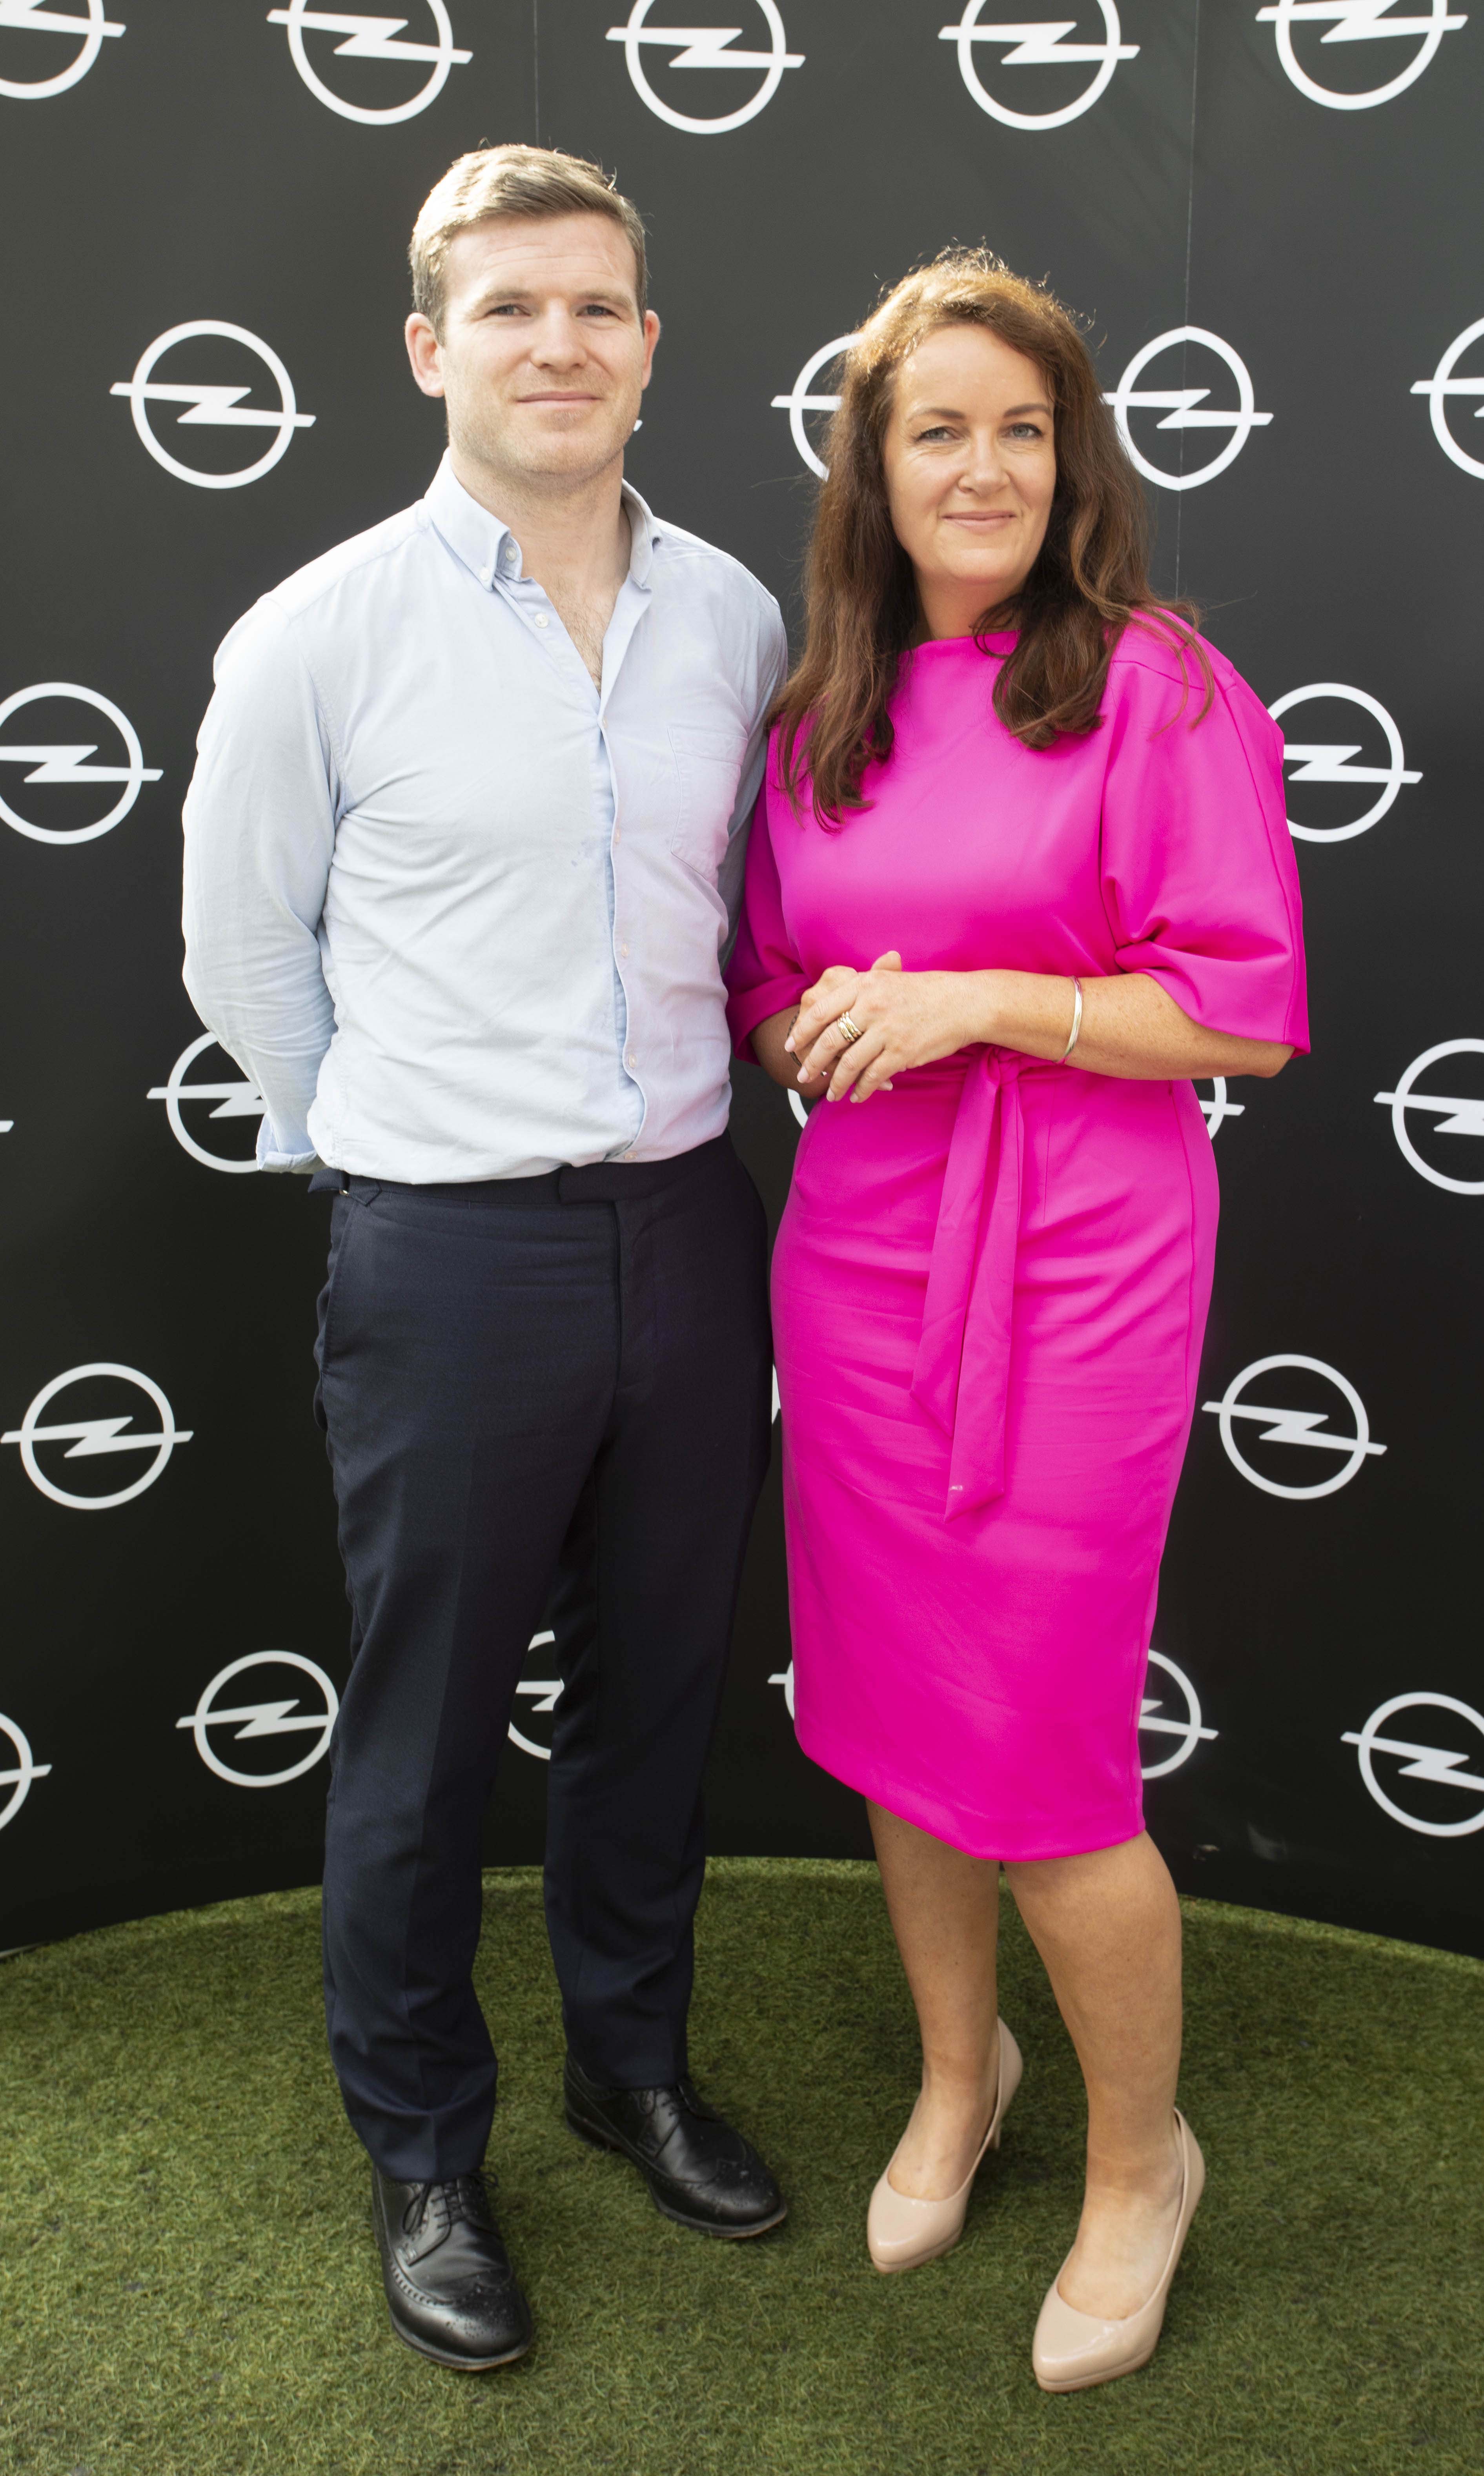 NO REPRO FEE 31/05/2018 Pictured at the Opel Ireland Art of Sitting Breakfast Briefing in House, Dublin were Gordon D’Arcy and Dr. Ciara Kelly